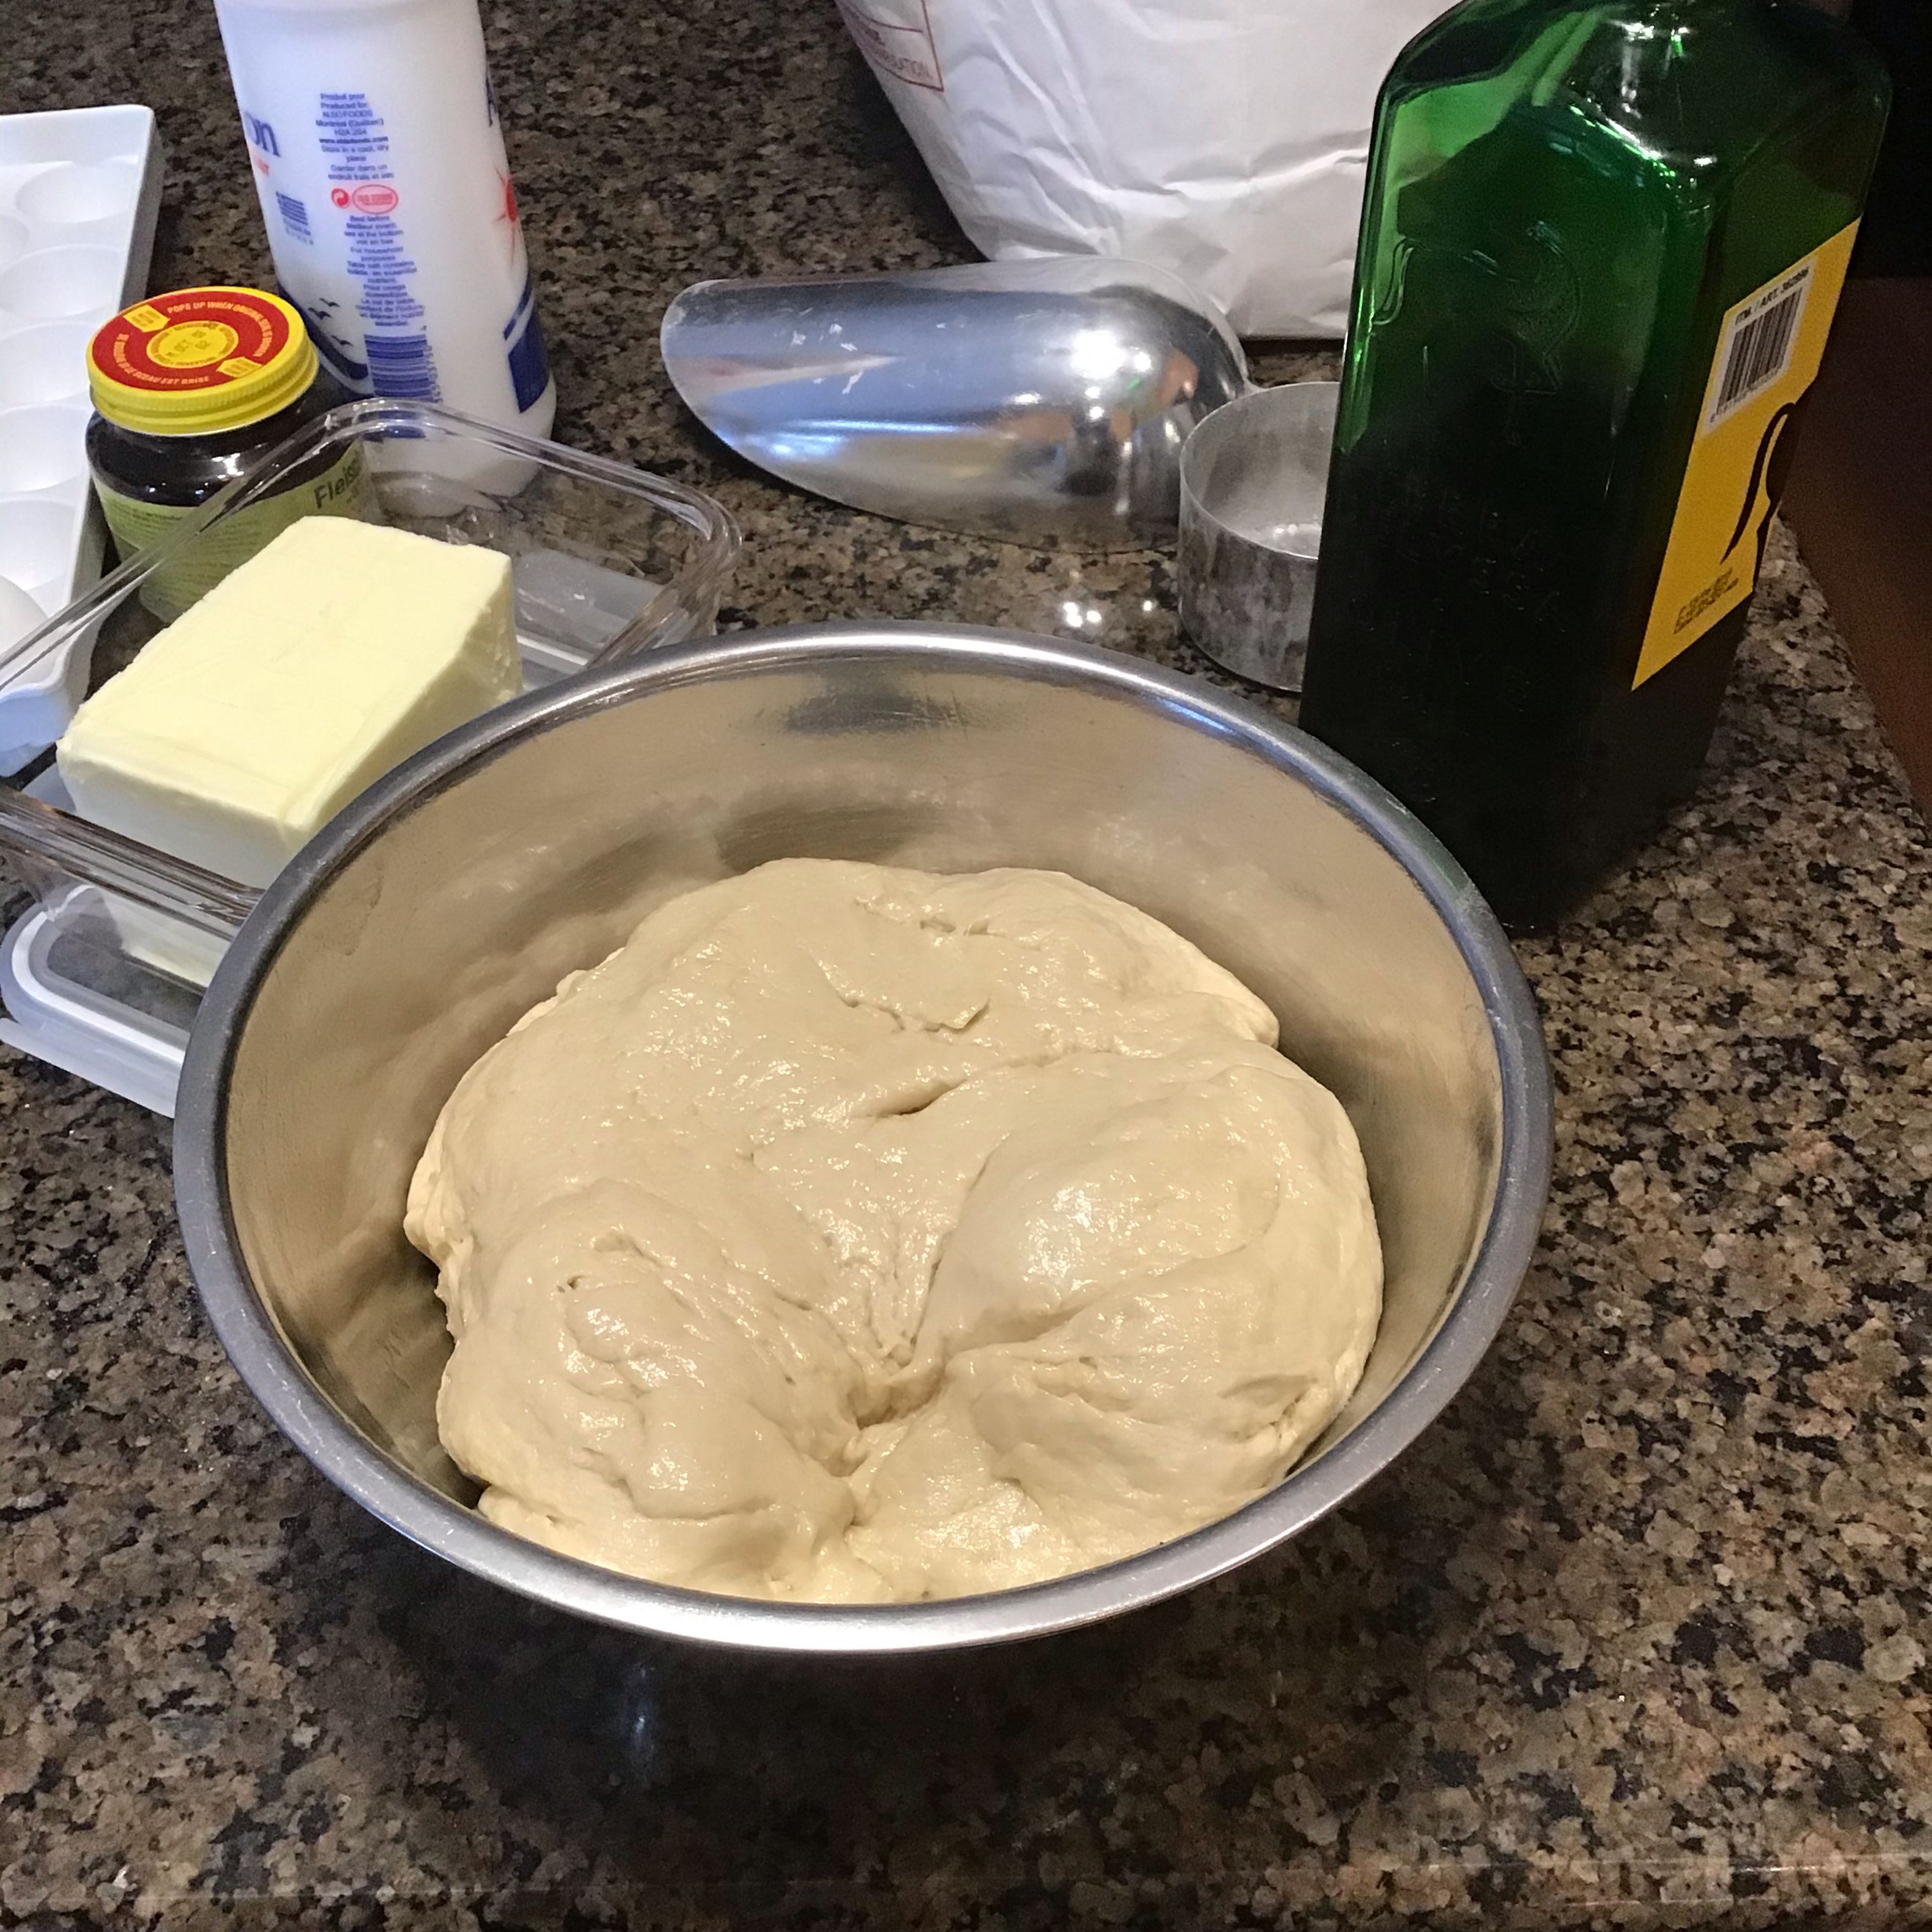 Use oil to grease the inside of a bowl. Transfer ball of dough to the oiled bowl. Turn dough in bowl to coat surface of dough with oil. Cover loosely with a clean kitchen towel or cling film and place in a warm spot to rise until doubled in size. May take 40 to 60 minutes depending on temperature.